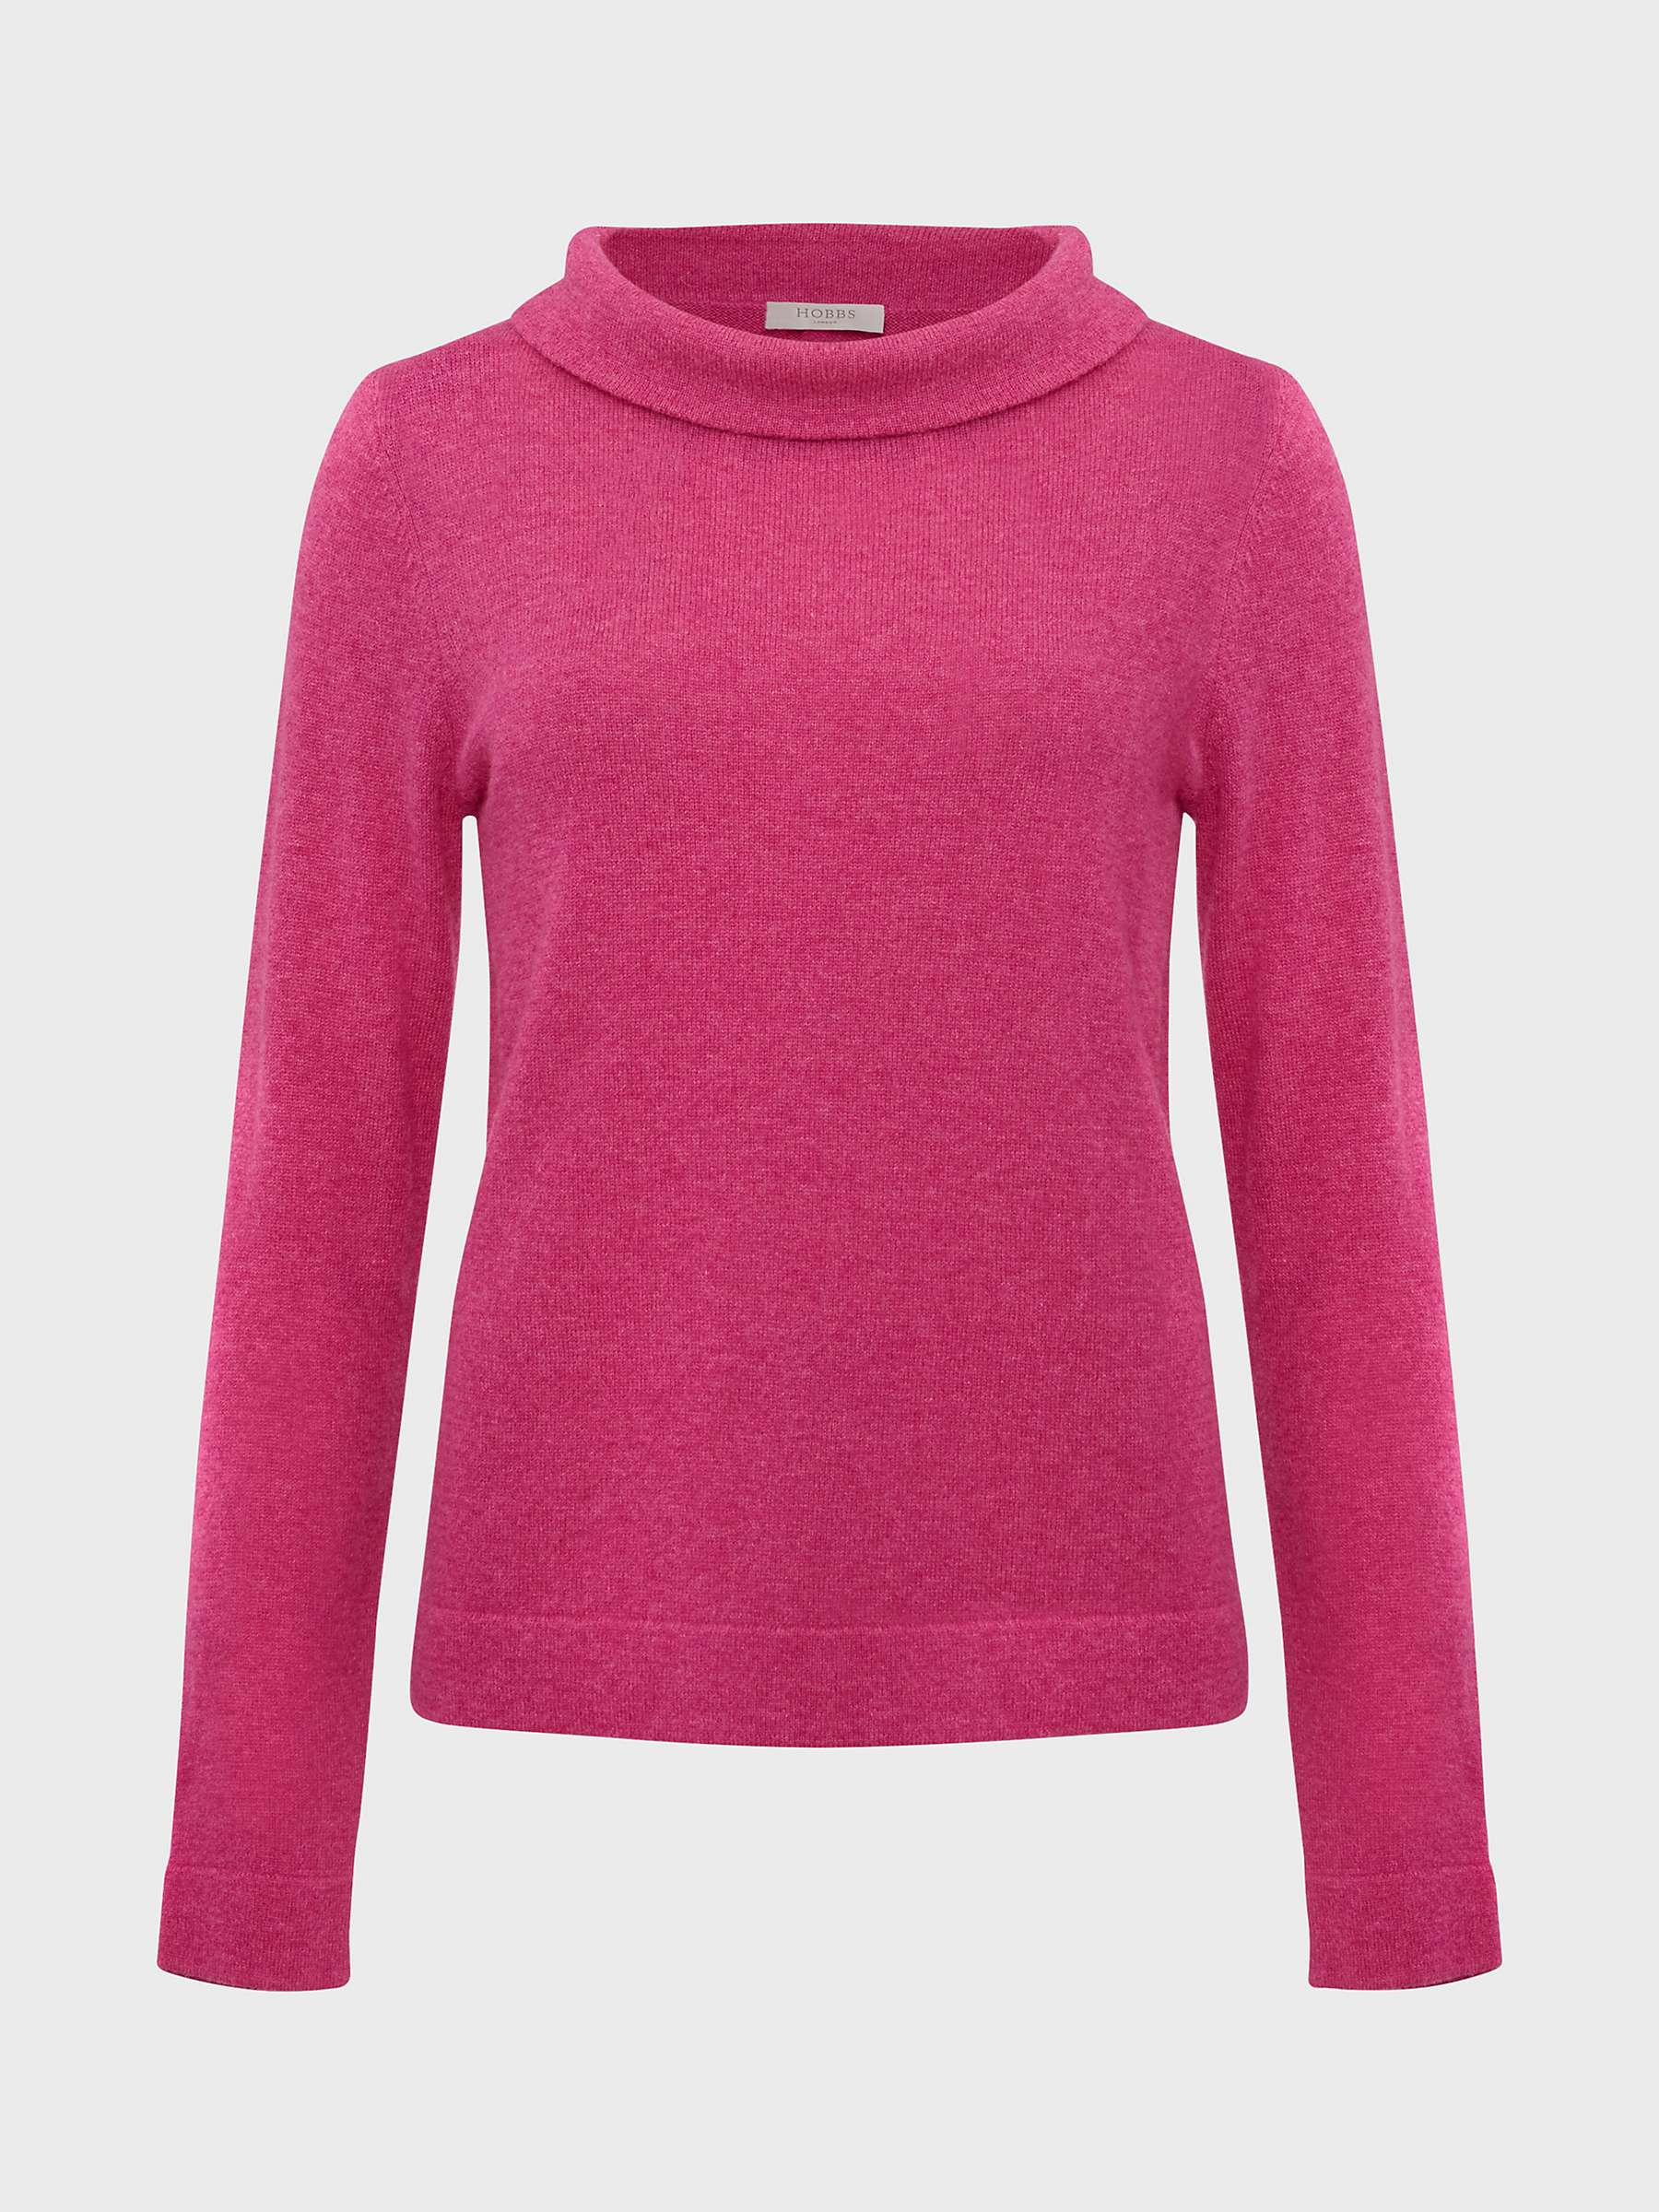 Buy Hobbs Audrey Cashmere and Wool Jumper Online at johnlewis.com